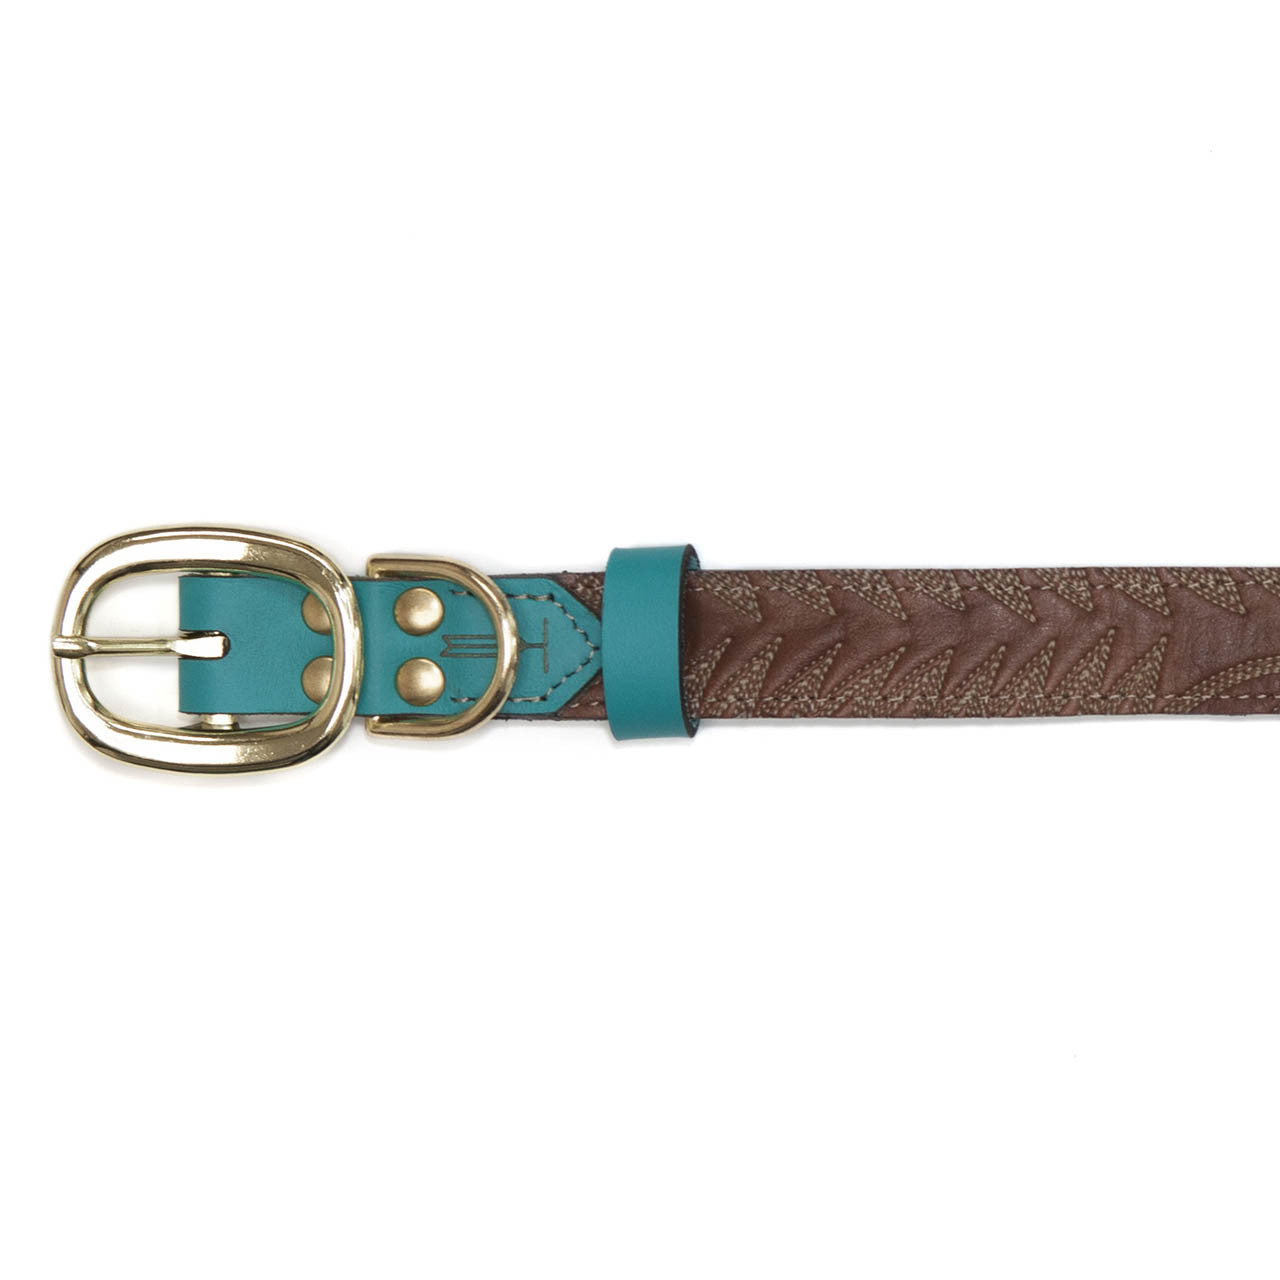 Turquoise Dog Collar with Dark Brown Leather + White Stitching (buckle)